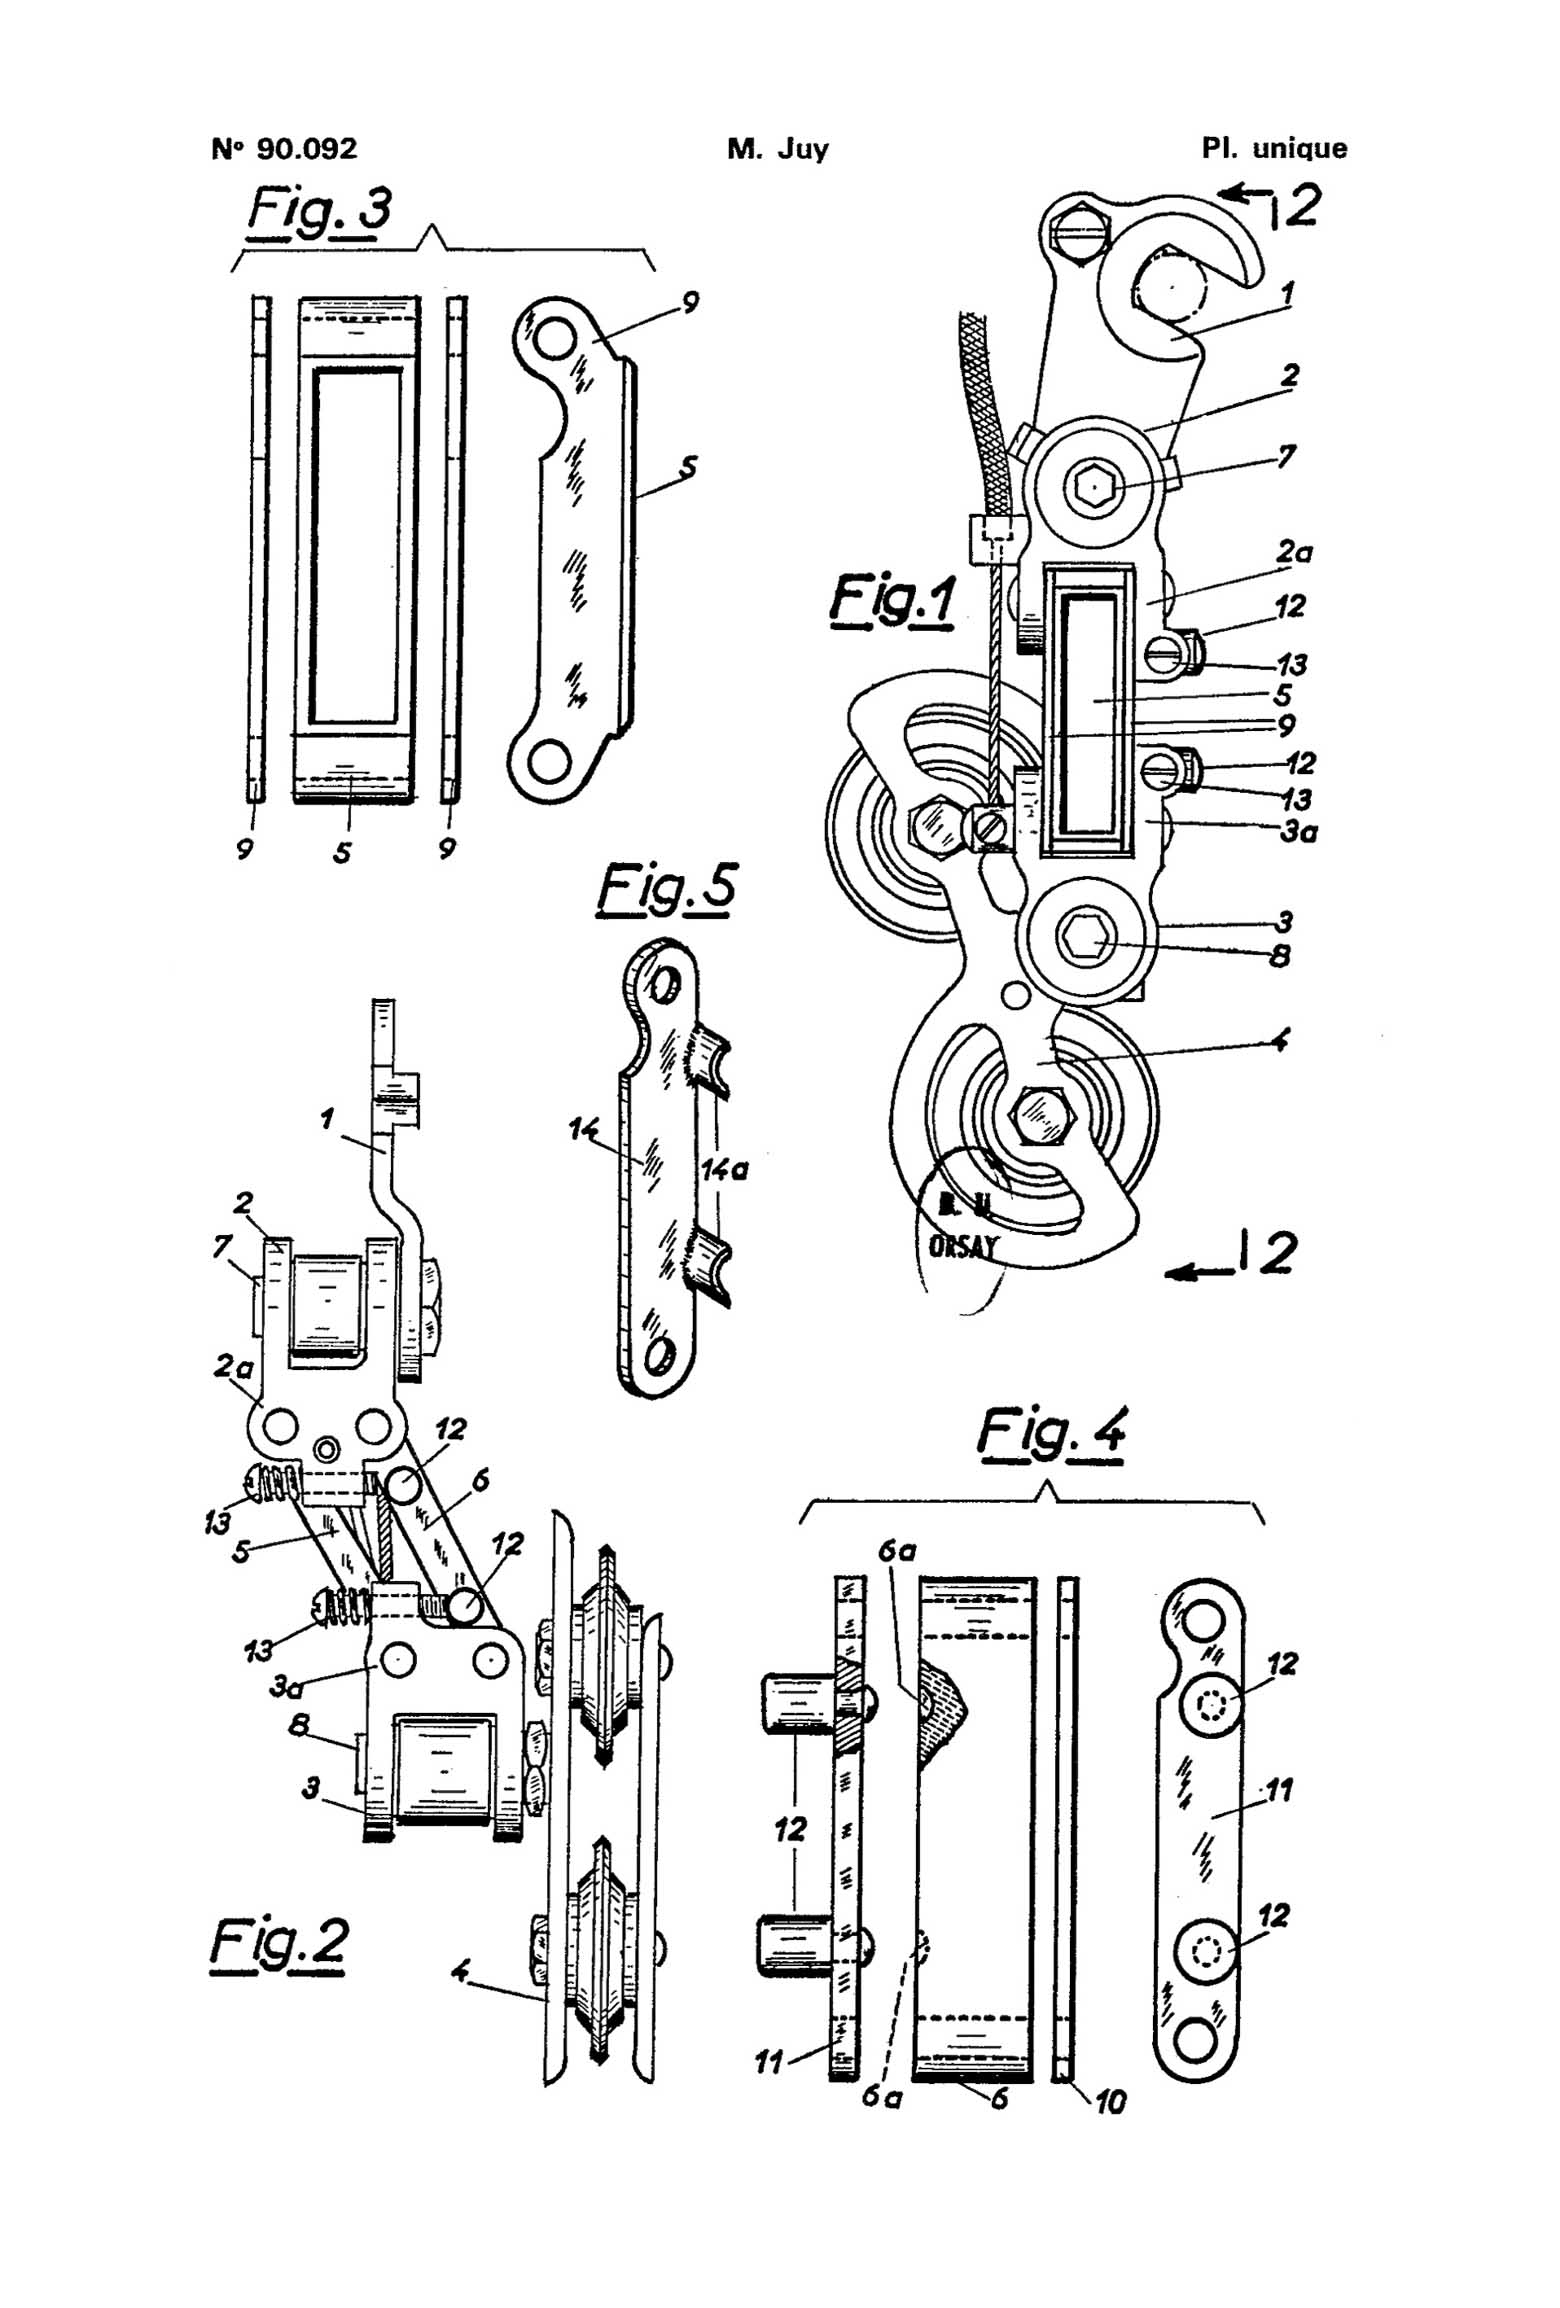 French Patent 1,319,997 Addition 90,092 scan 4 - Simplex main image